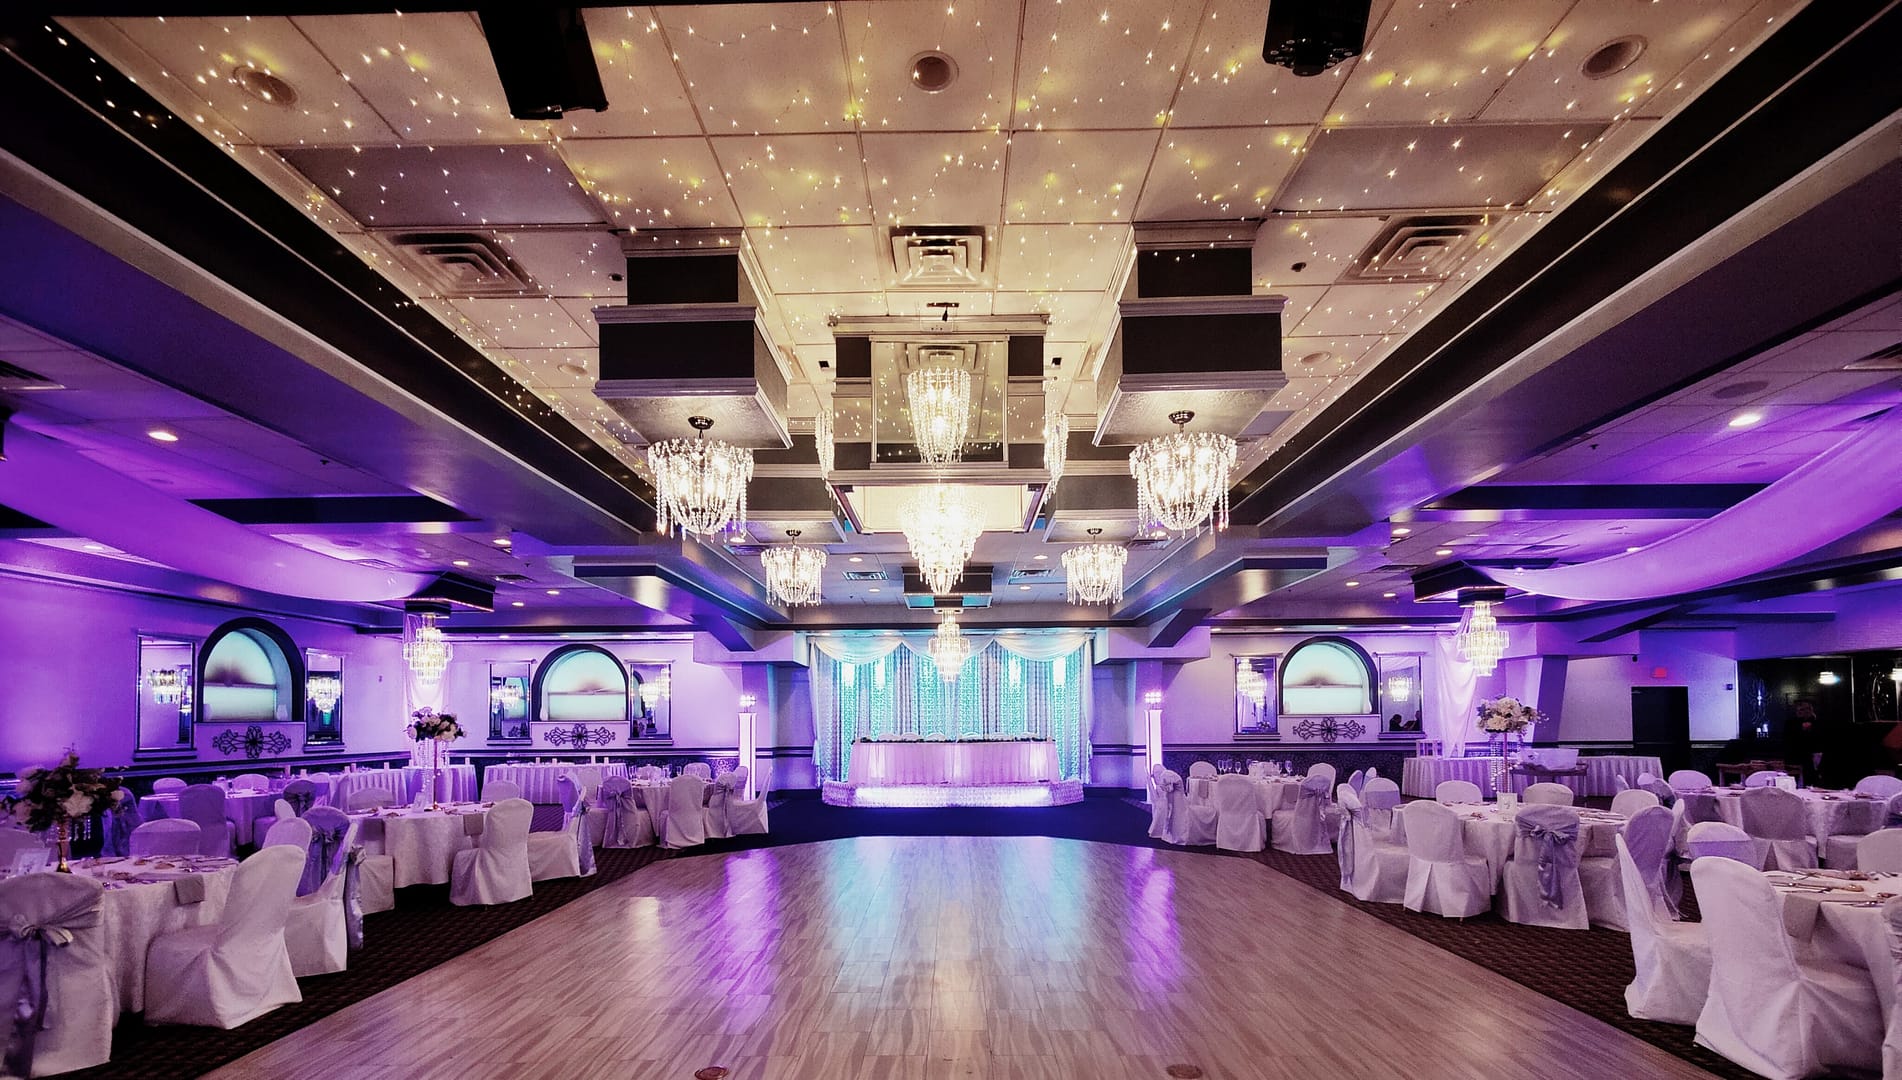 Akron Wedding DJ Lighting and Decor at Guy's Party Center In Akron Ohio